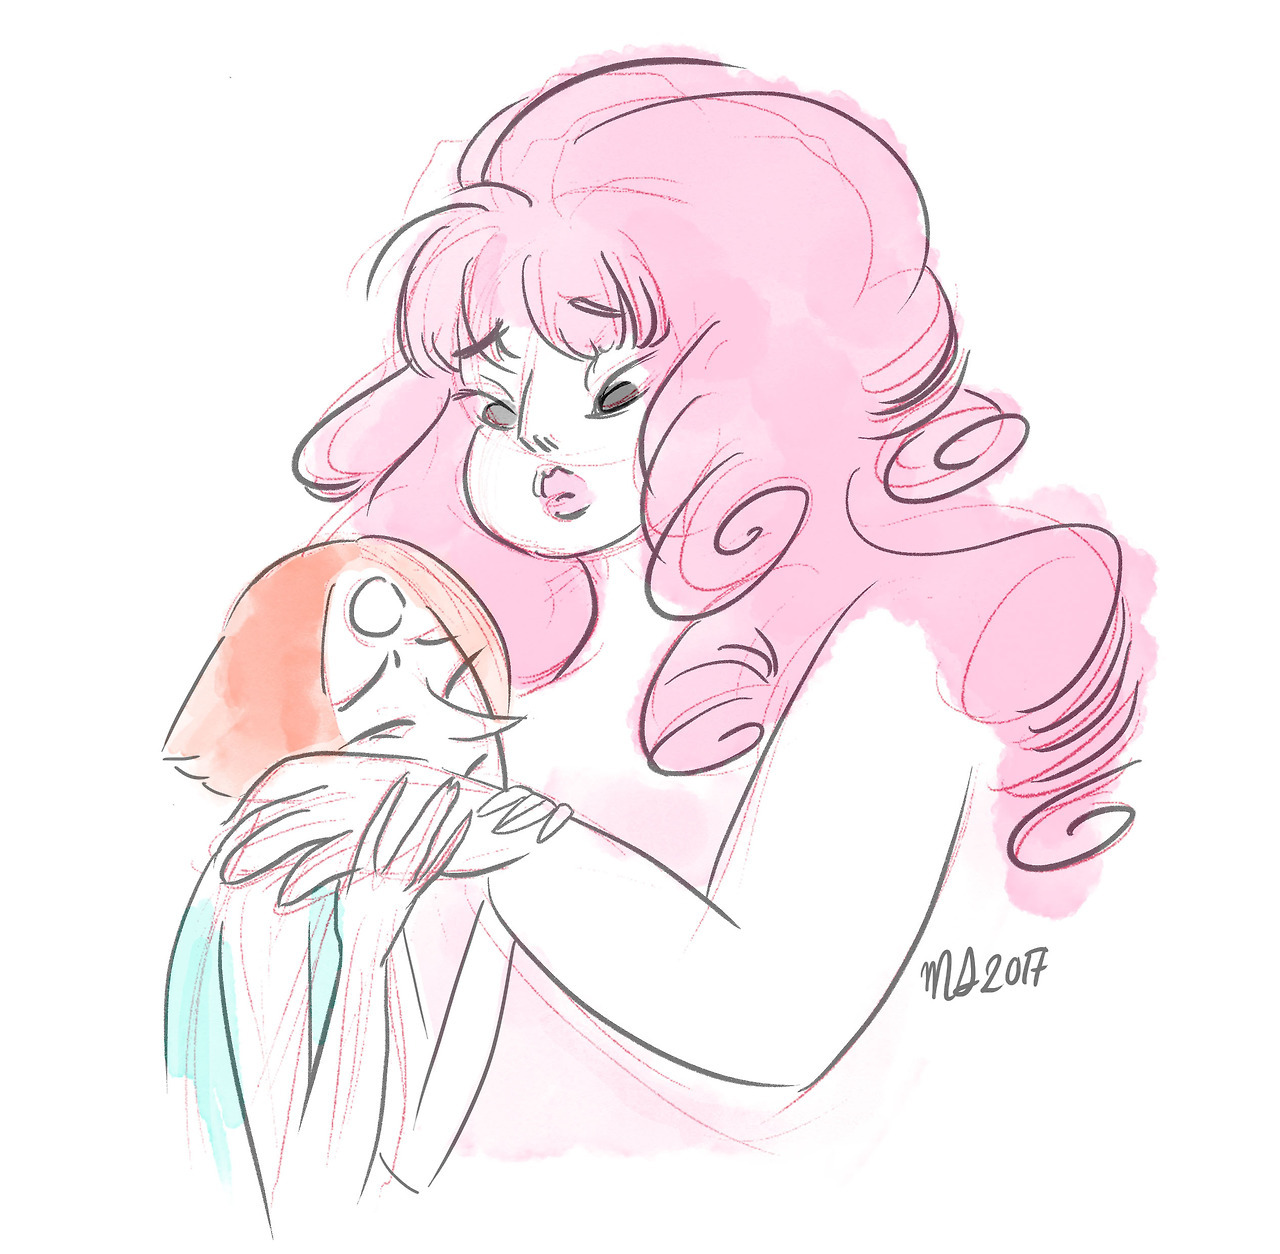 martadziedzic:Another quick sketch from steven universe. I kind of love the relationship